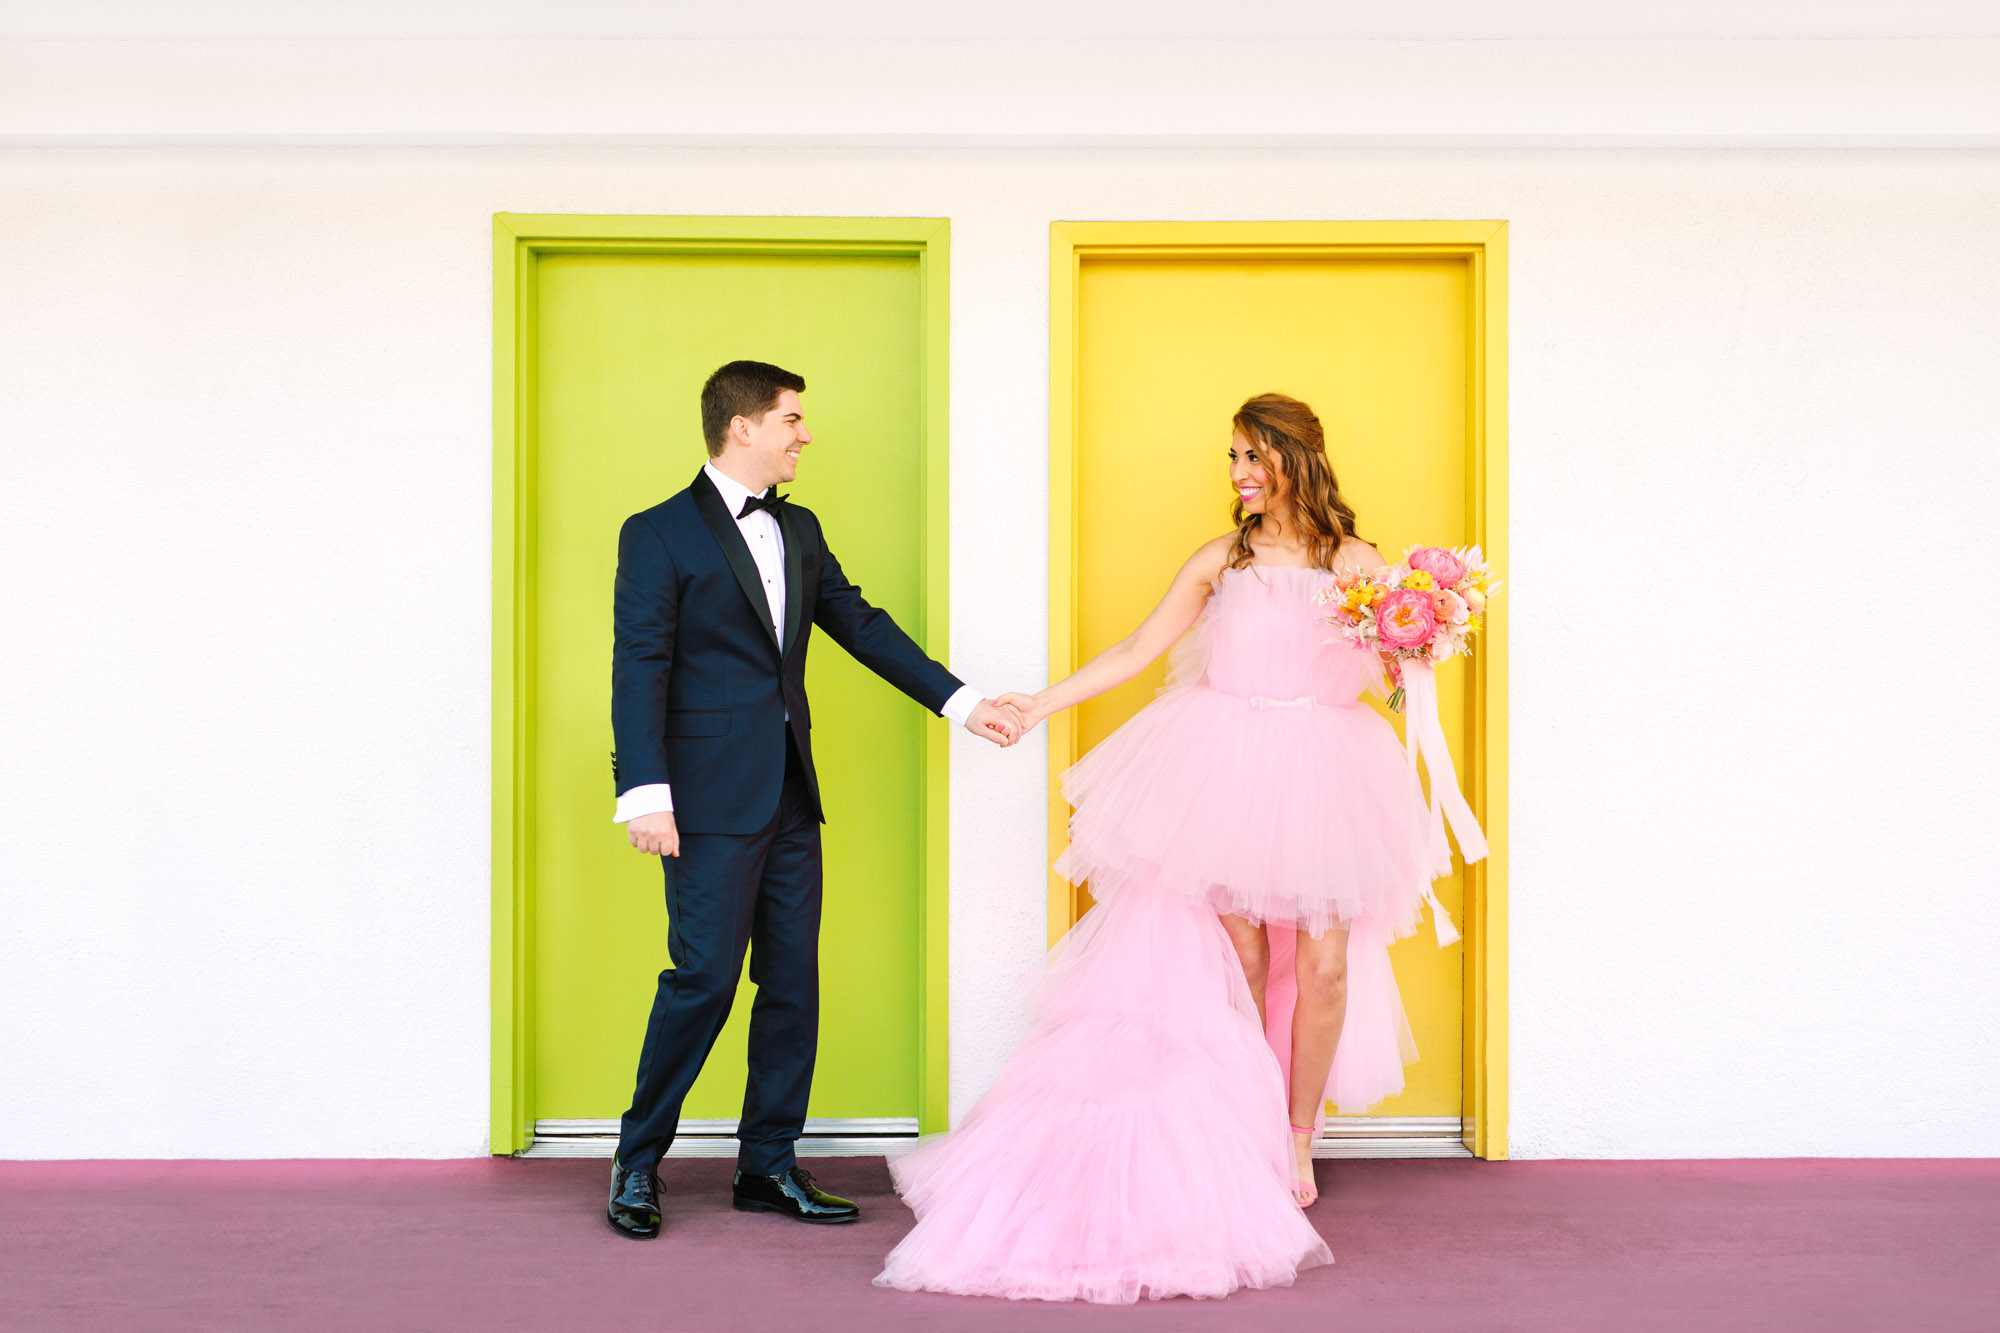 Pink wedding dress Palm Springs elopement featured on Green Wedding Shoes | Colorful mid-century modern wedding with Saguaro Hotel backdrop | Vibrant and elevated wedding photos for fun-loving couples in Southern California #palmspringswedding #palmspringselopement #pinkwedding #greenweddingshoes Source: Mary Costa Photography | Los Angeles